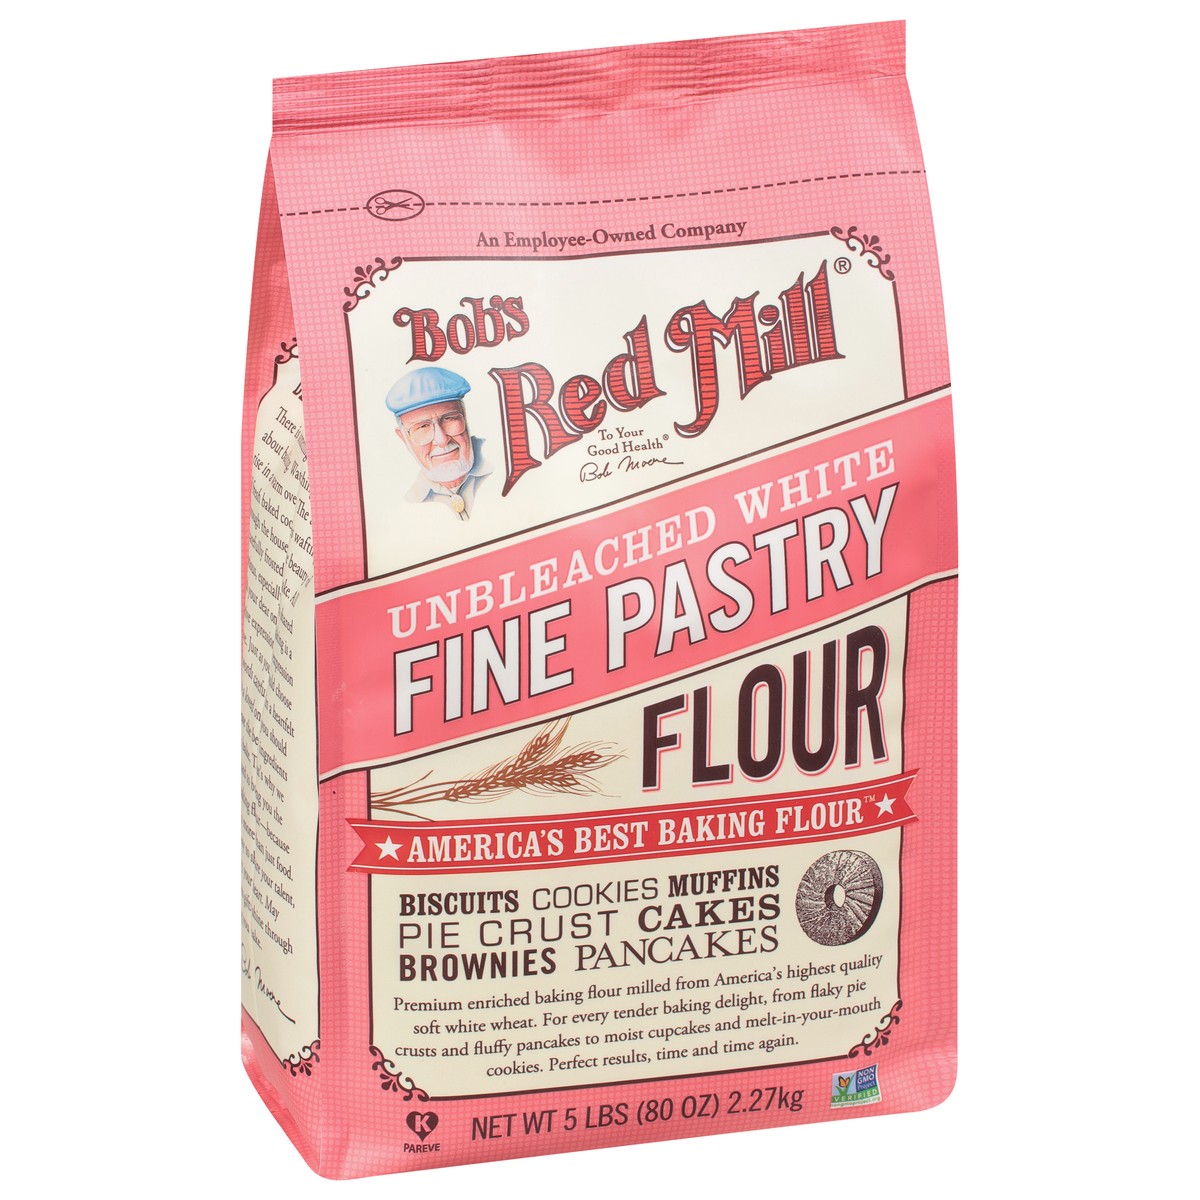 slide 2 of 9, Bobs Bob's Red Mill Unbleached White Pastry Flour, 5 lb